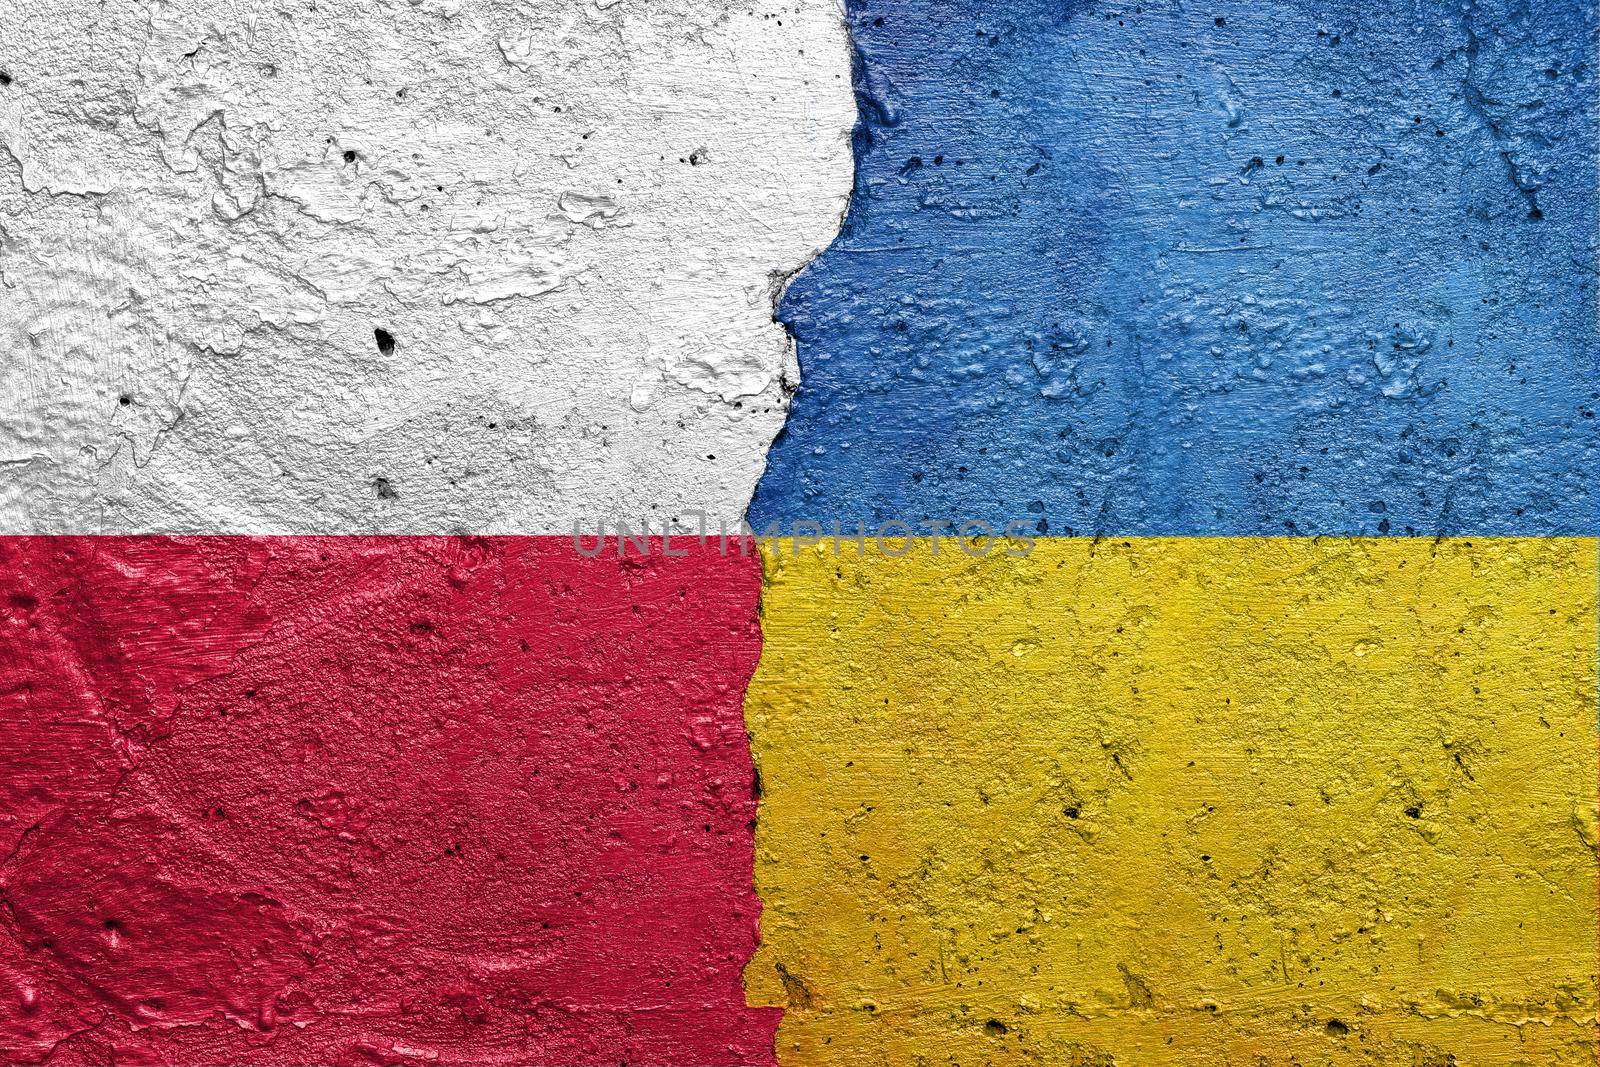 Poland and Ukraine - Cracked concrete wall painted with a Polish flag on the left and a Ukrainian flag on the right stock photo by adamr